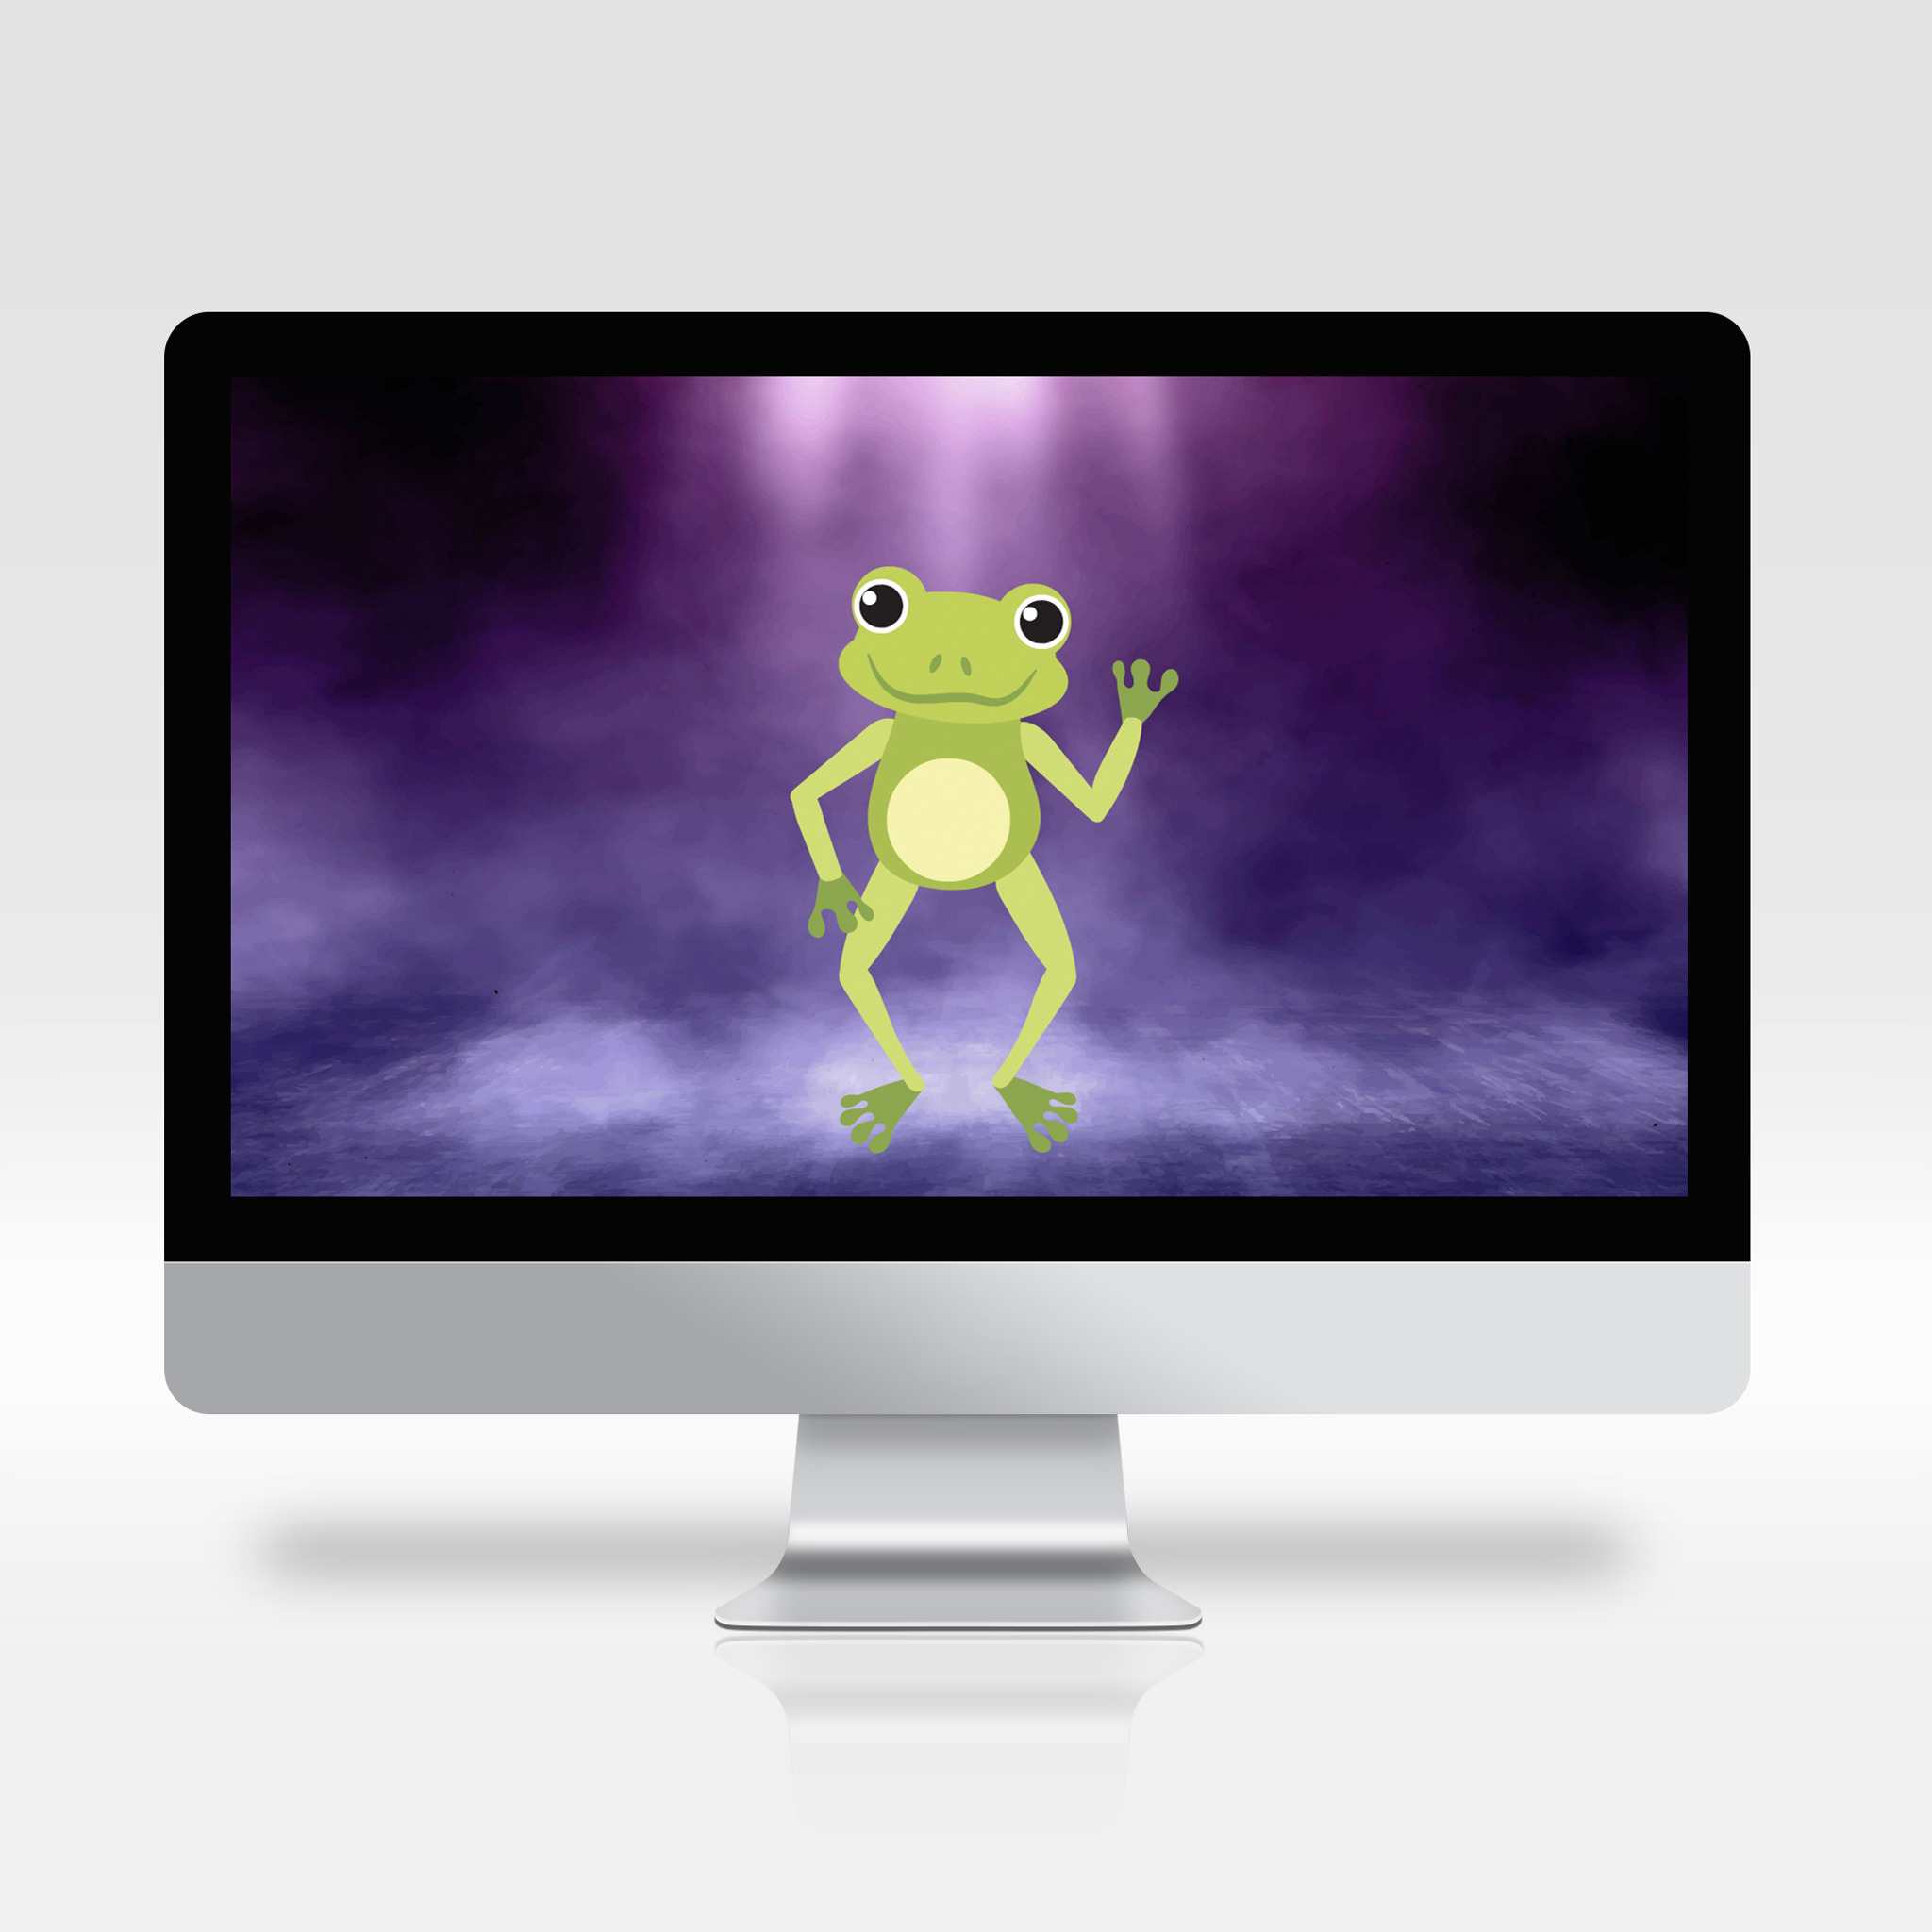 Mock up of a frog animation